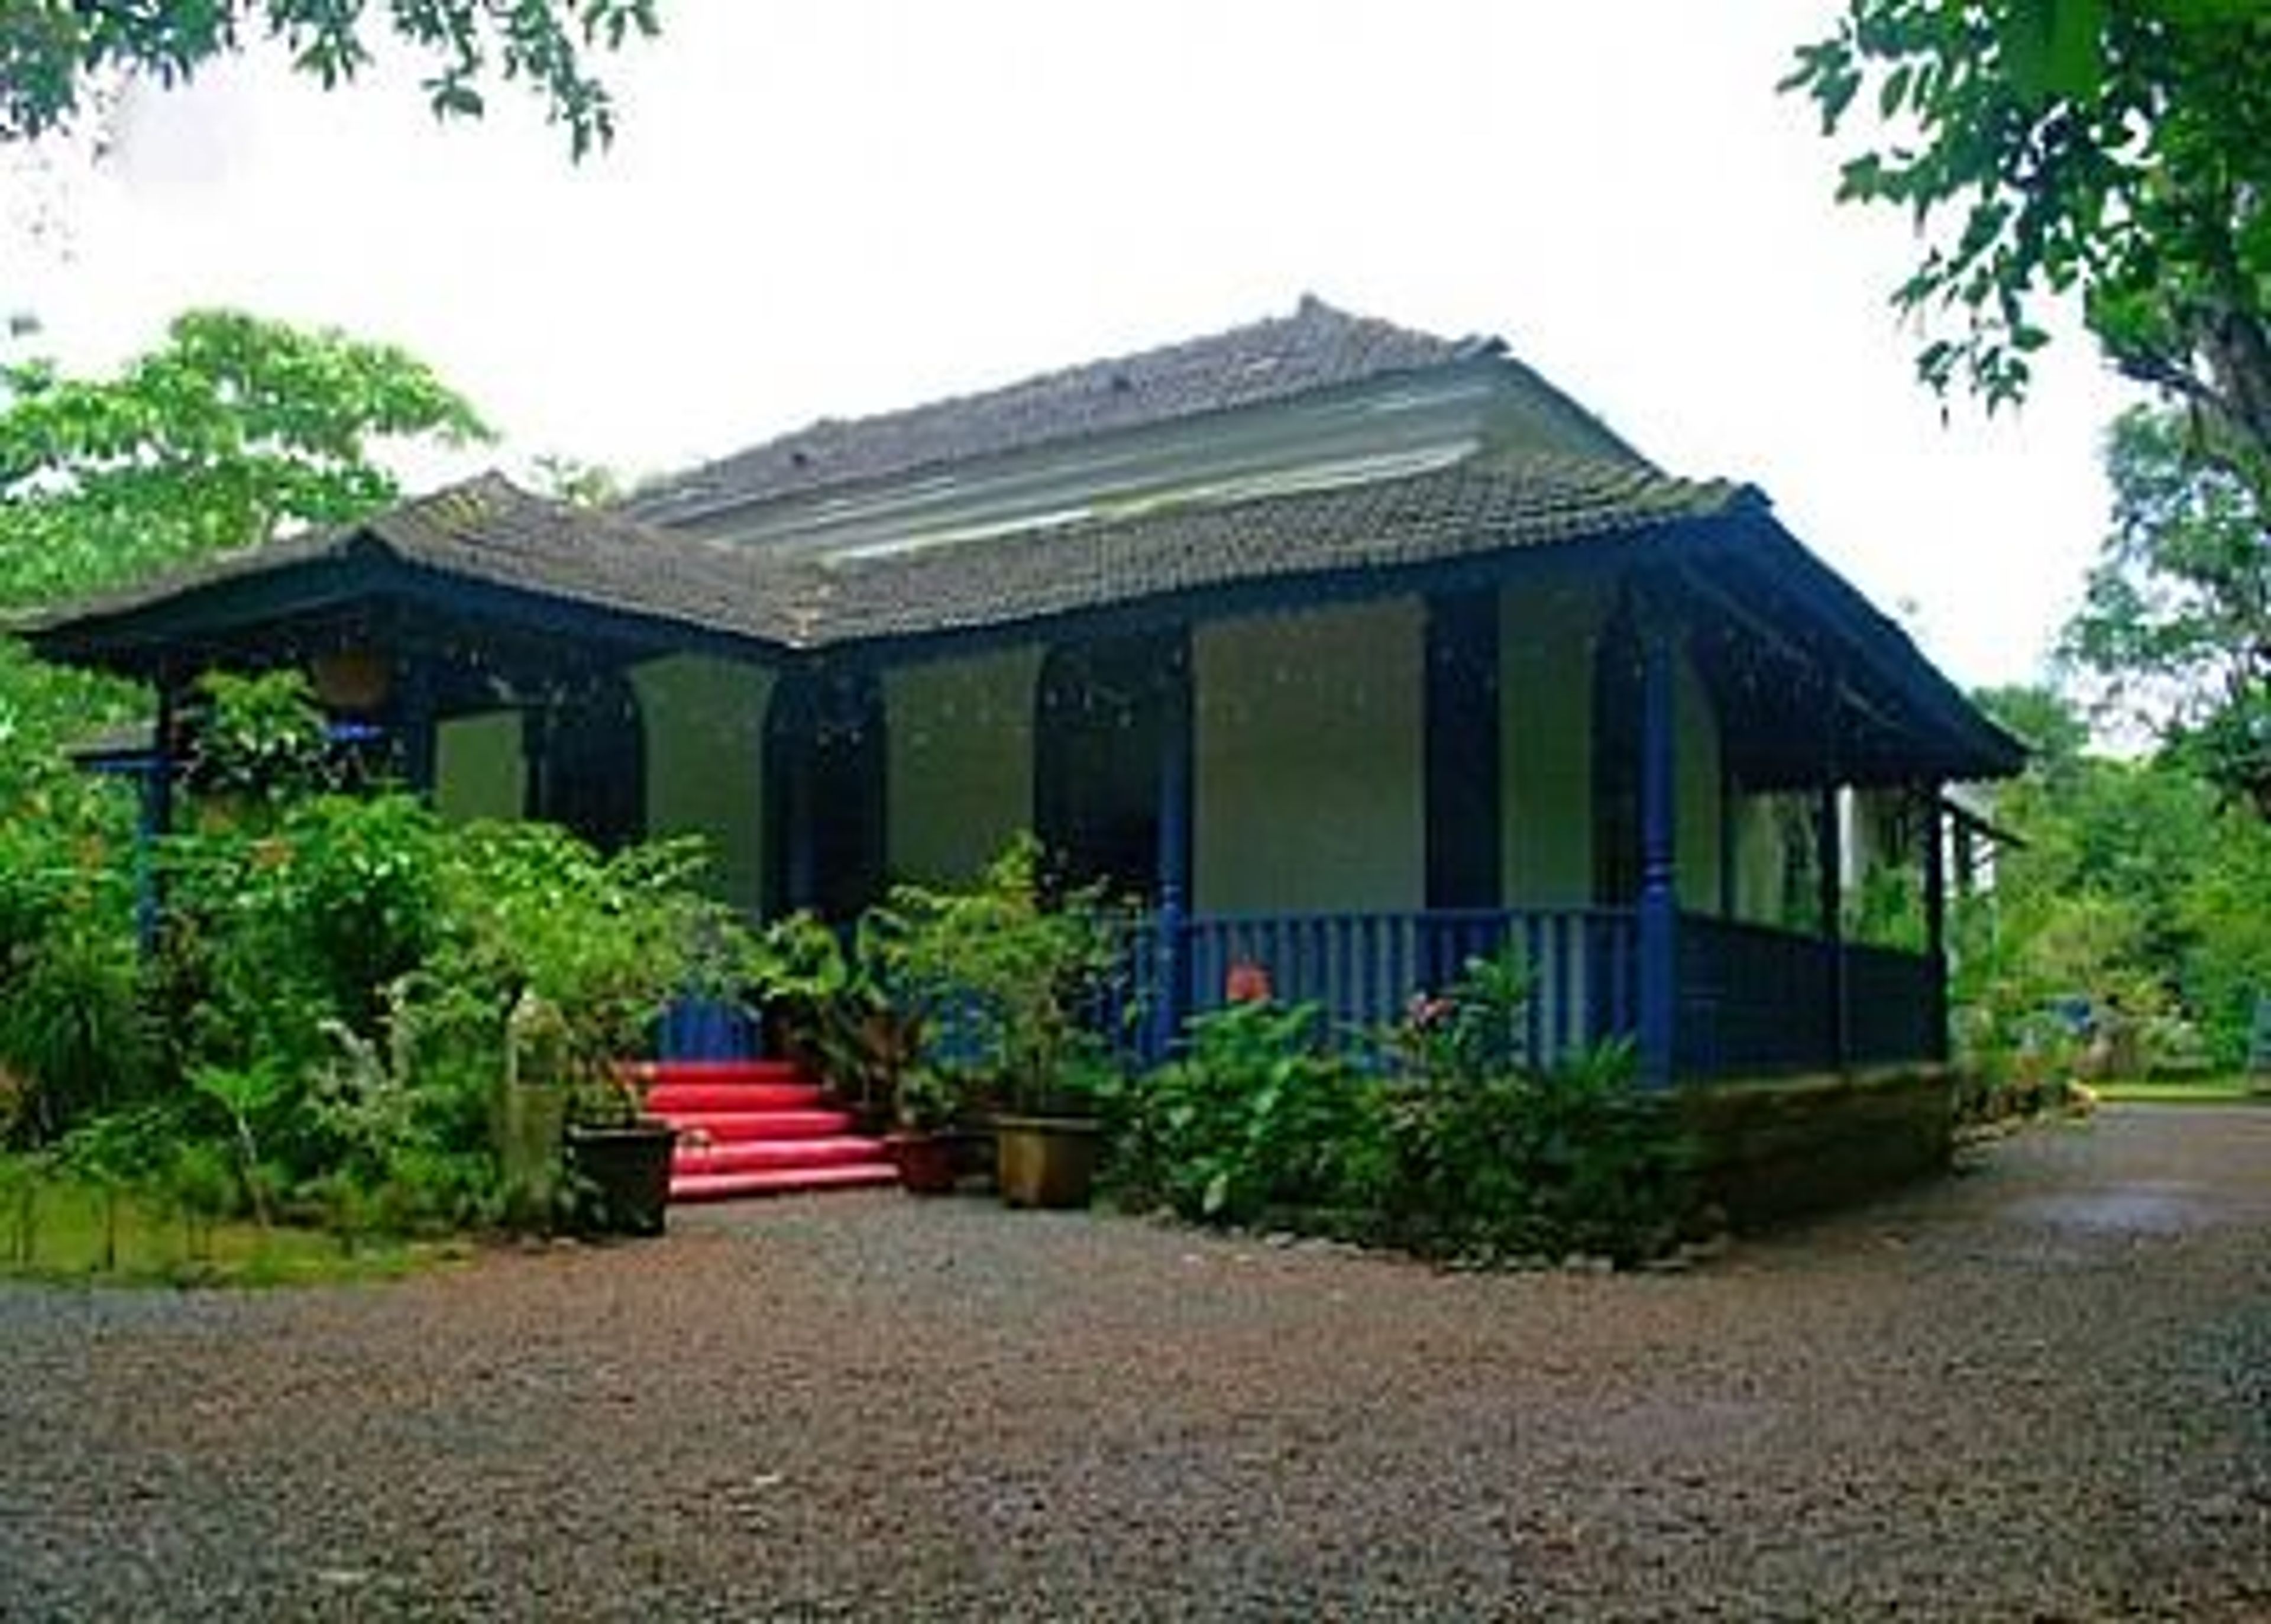 Front view of the house